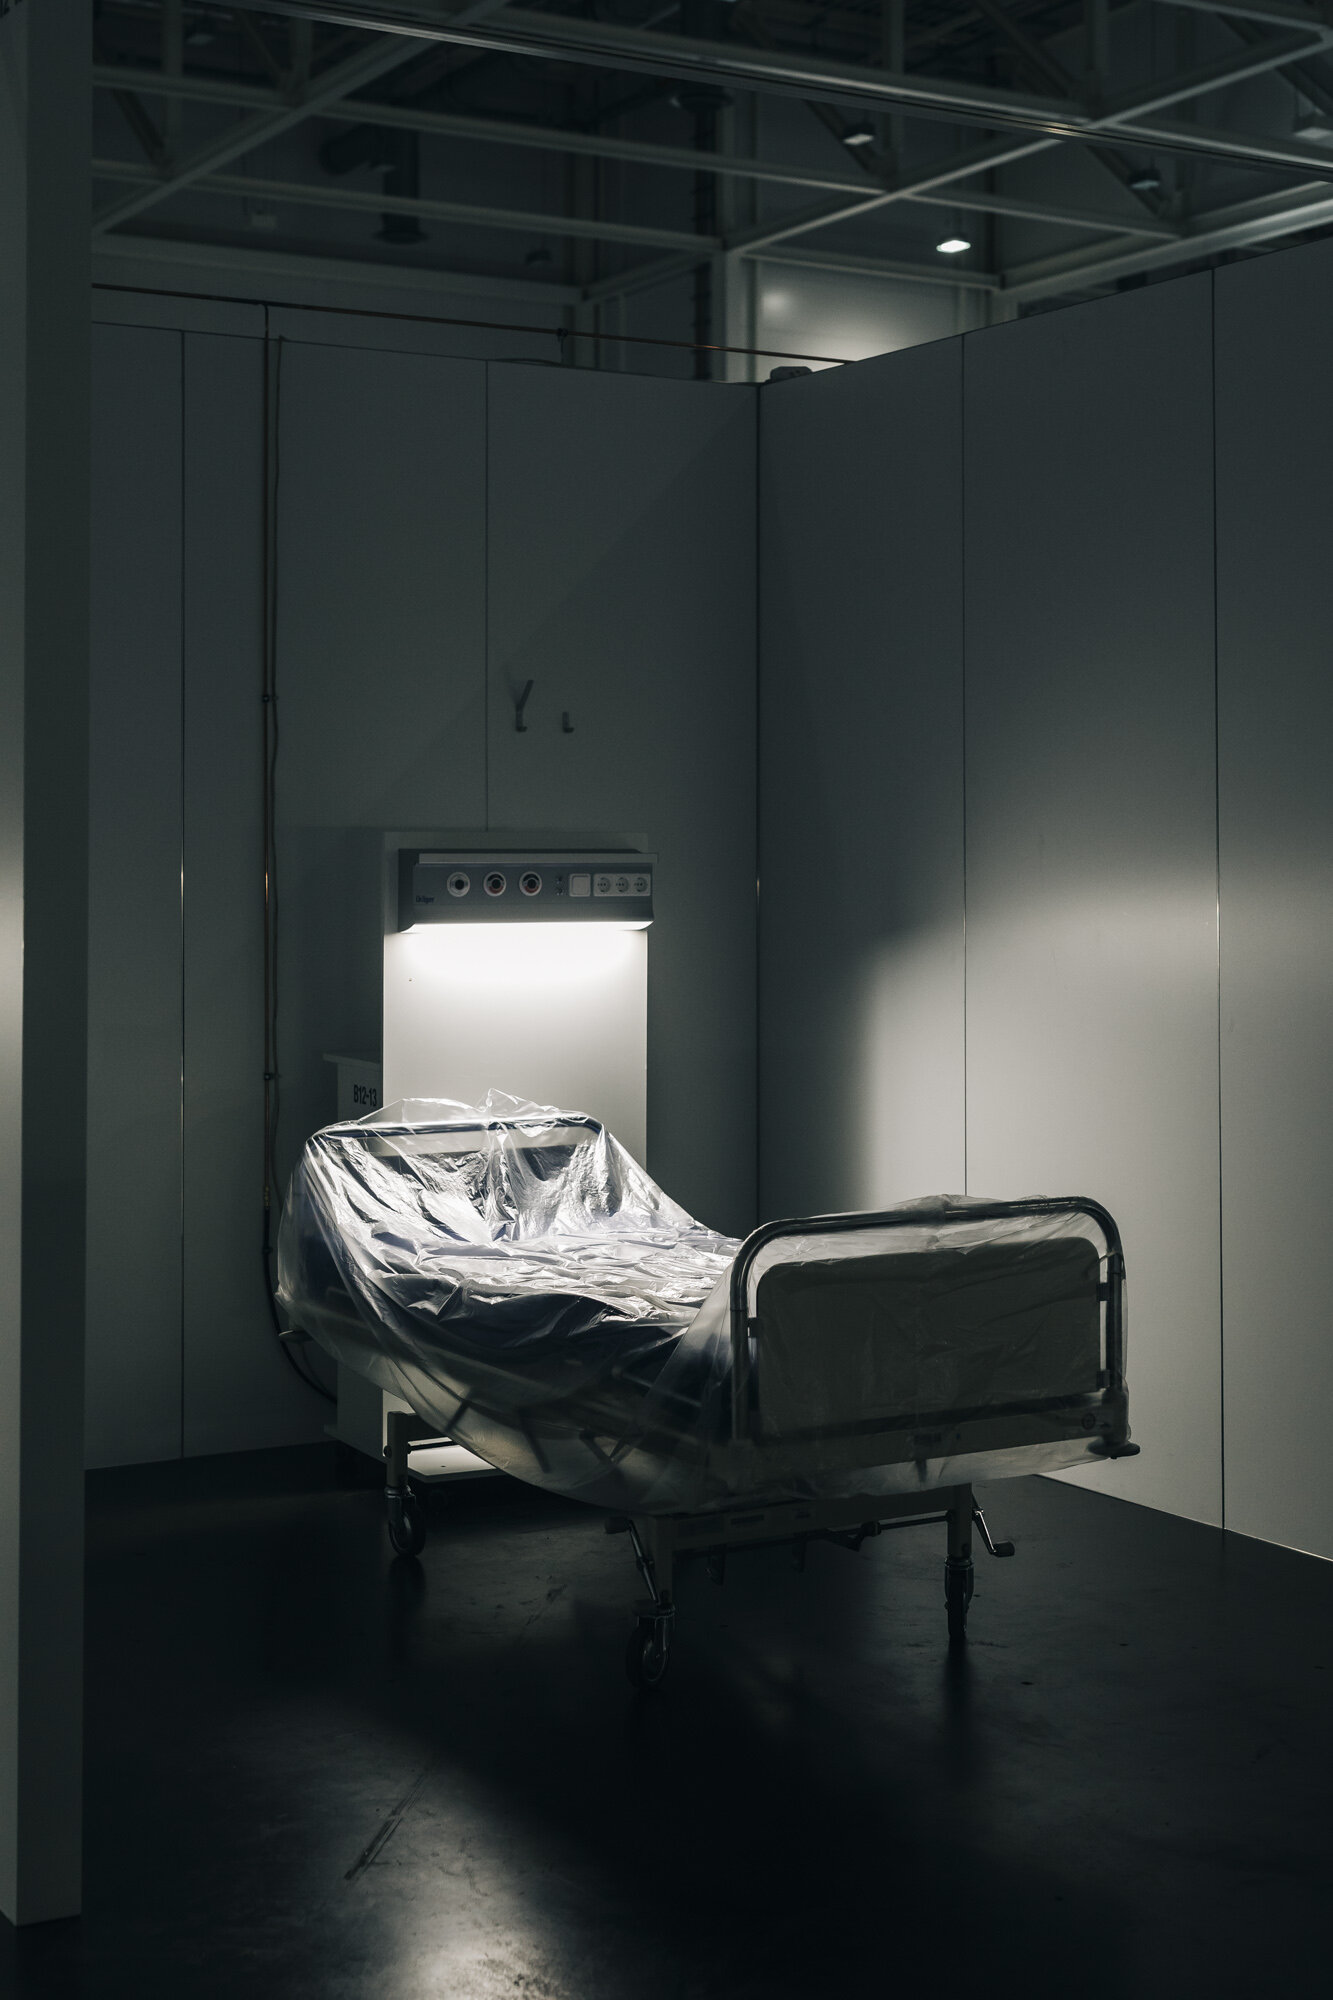  A bed in a makeshift hospital in Hannover. Despite high case numbers, the health system in Germany has not collapsed. 